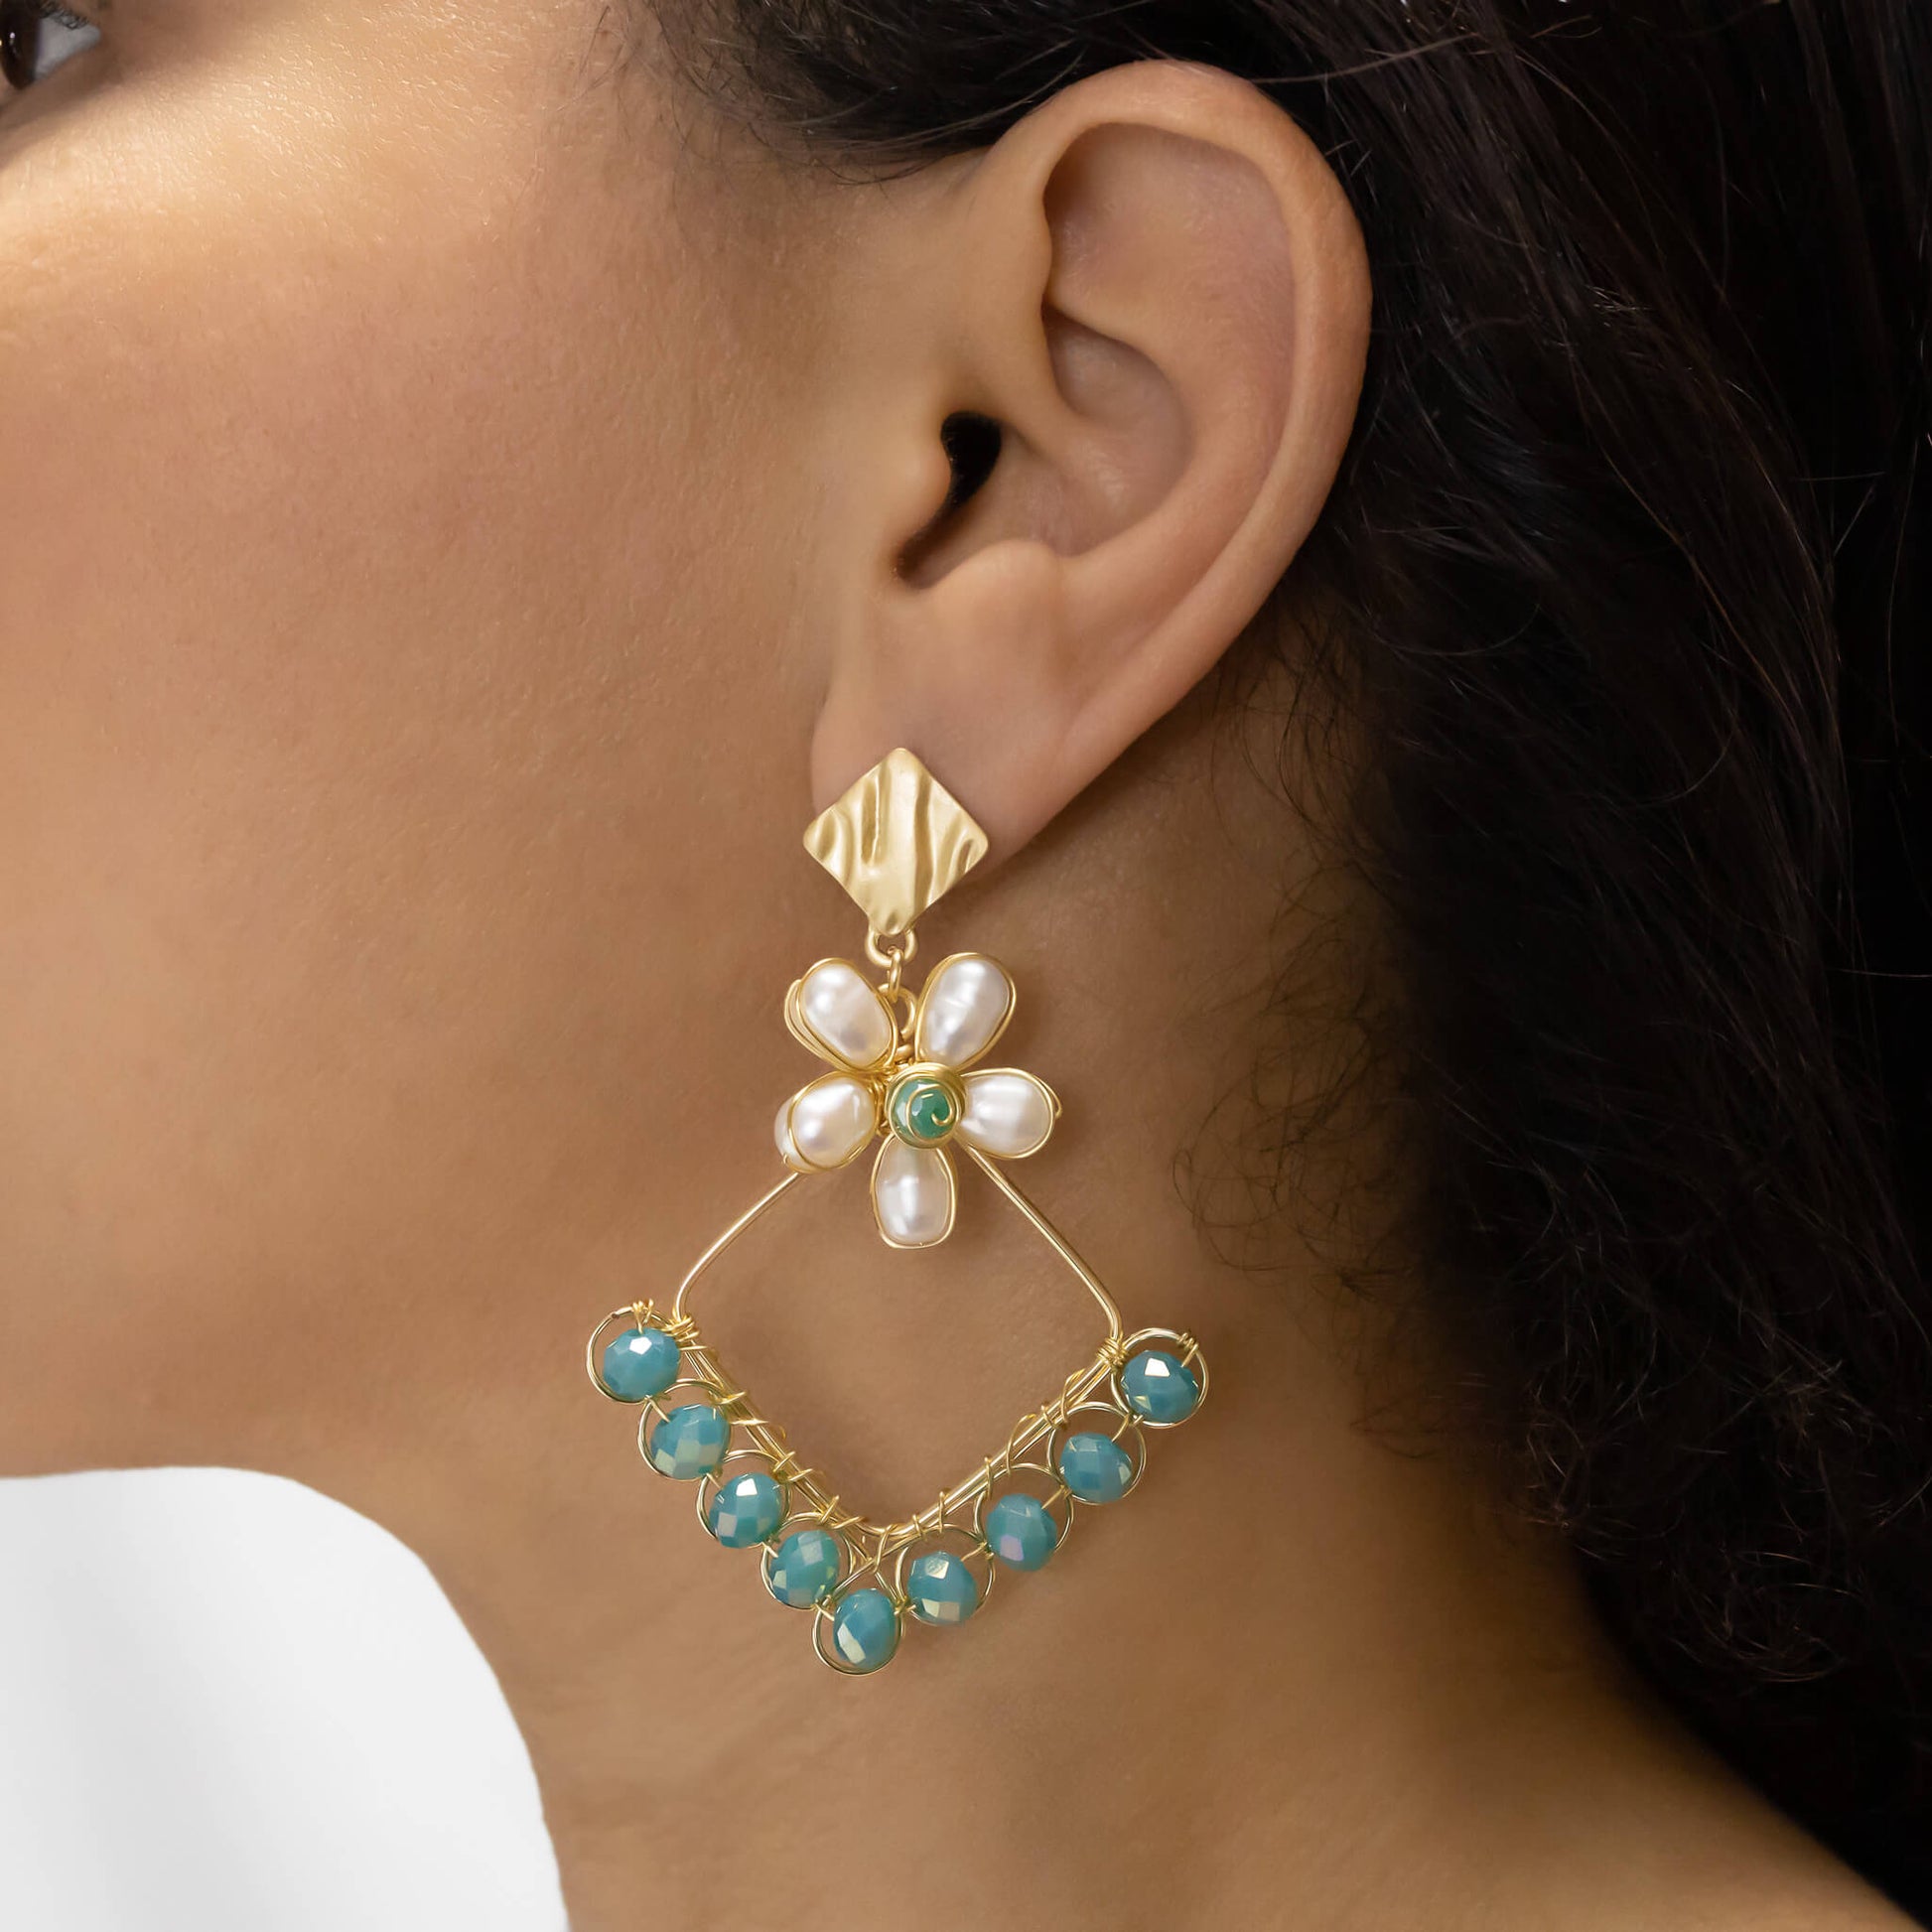 Mila Earrings on a model. Gold Color Earrings with  green Crystal Beads and fresh water pearls. Stud Earrings. 